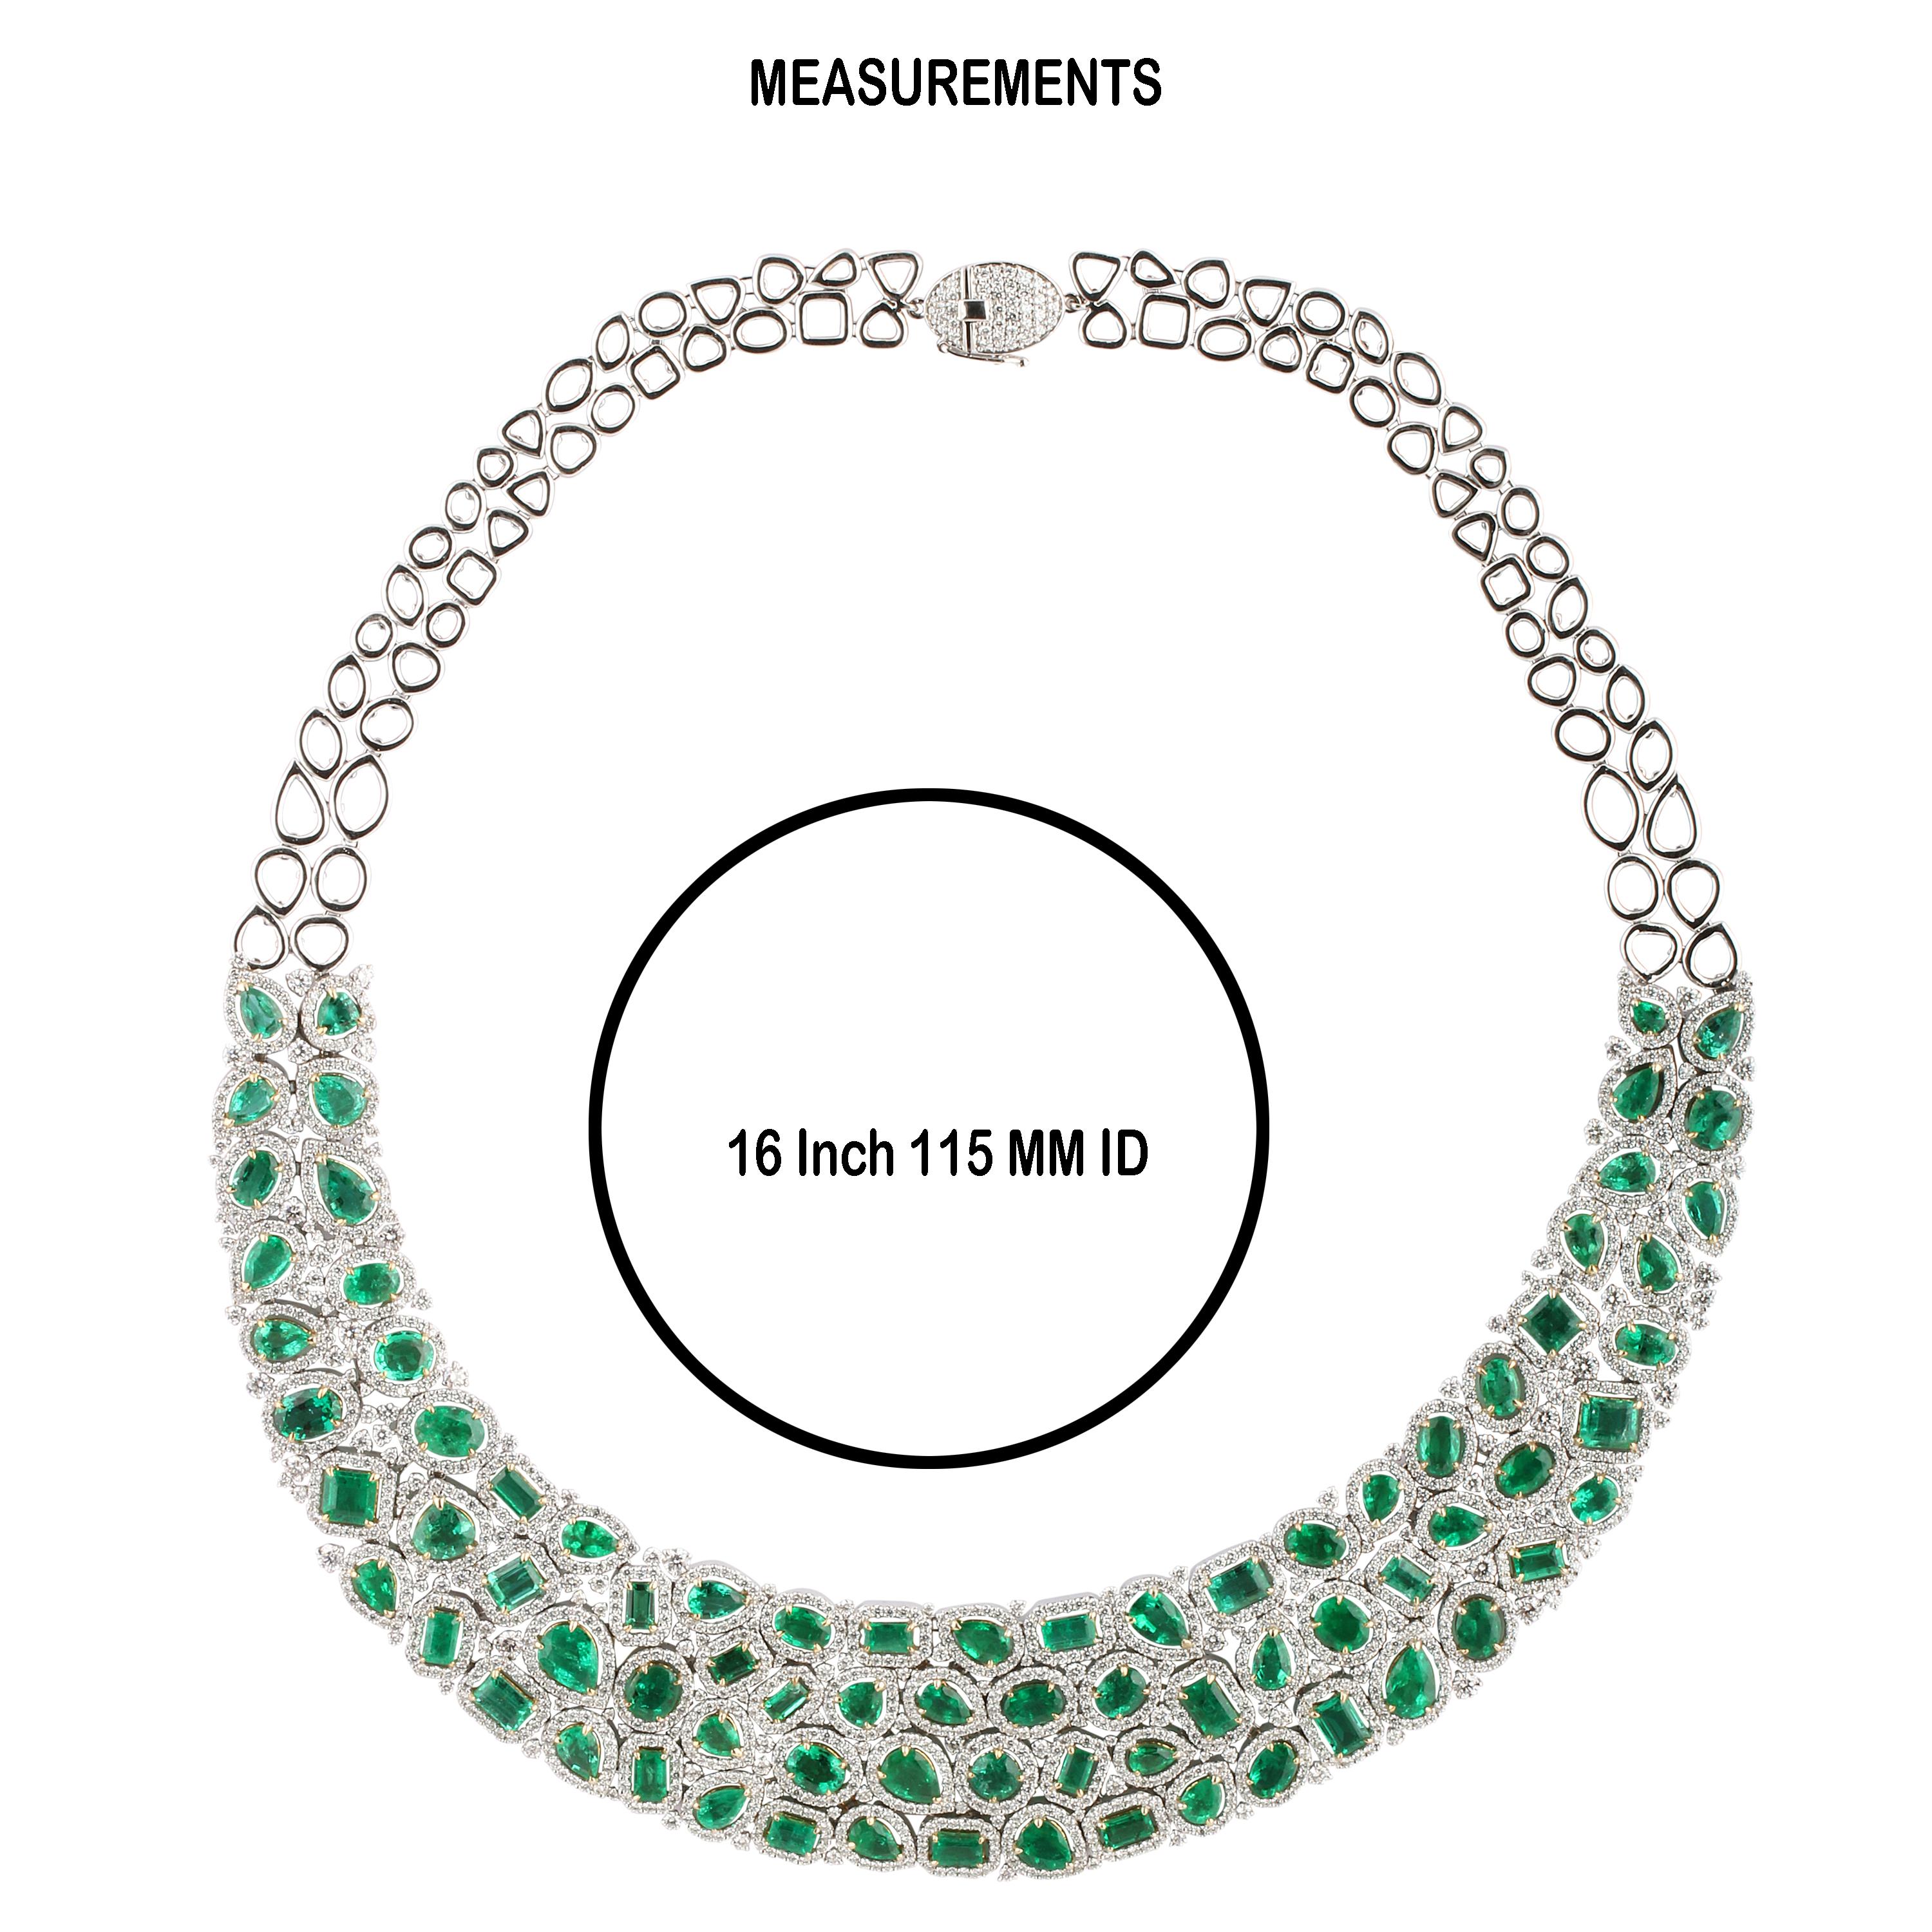 cleopatra's emerald necklace